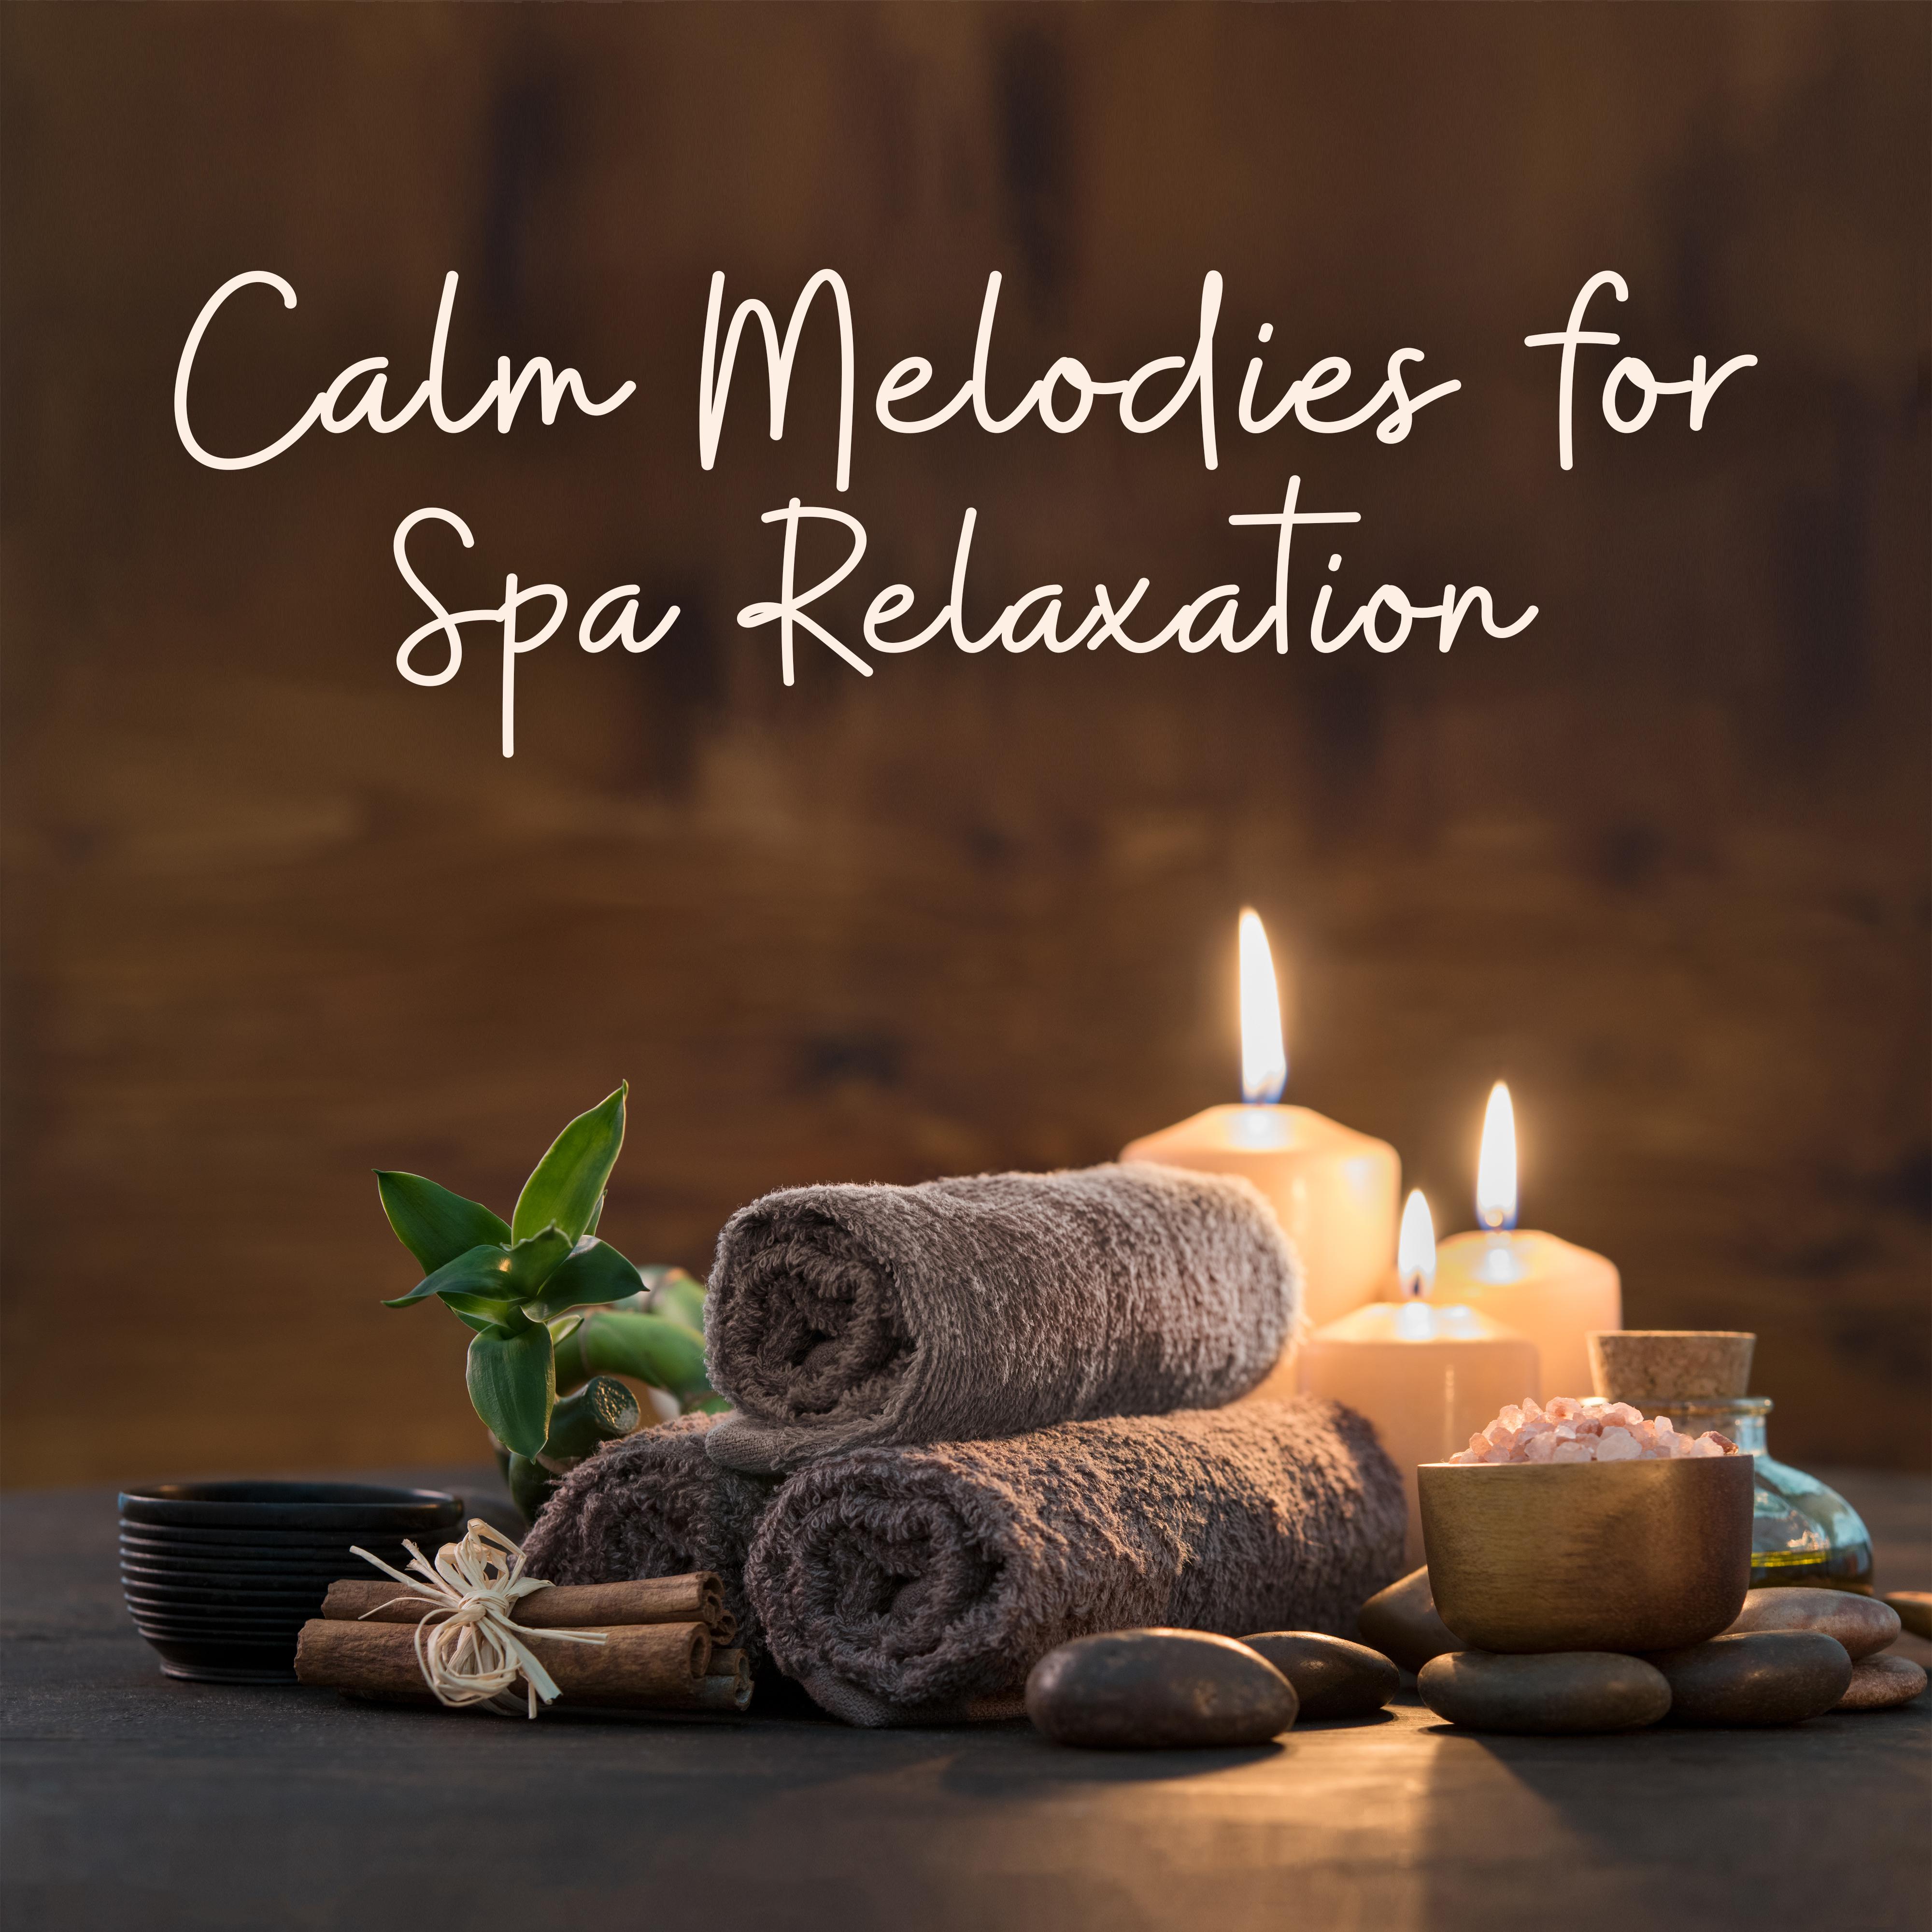 Calm Melodies for Spa Relaxation